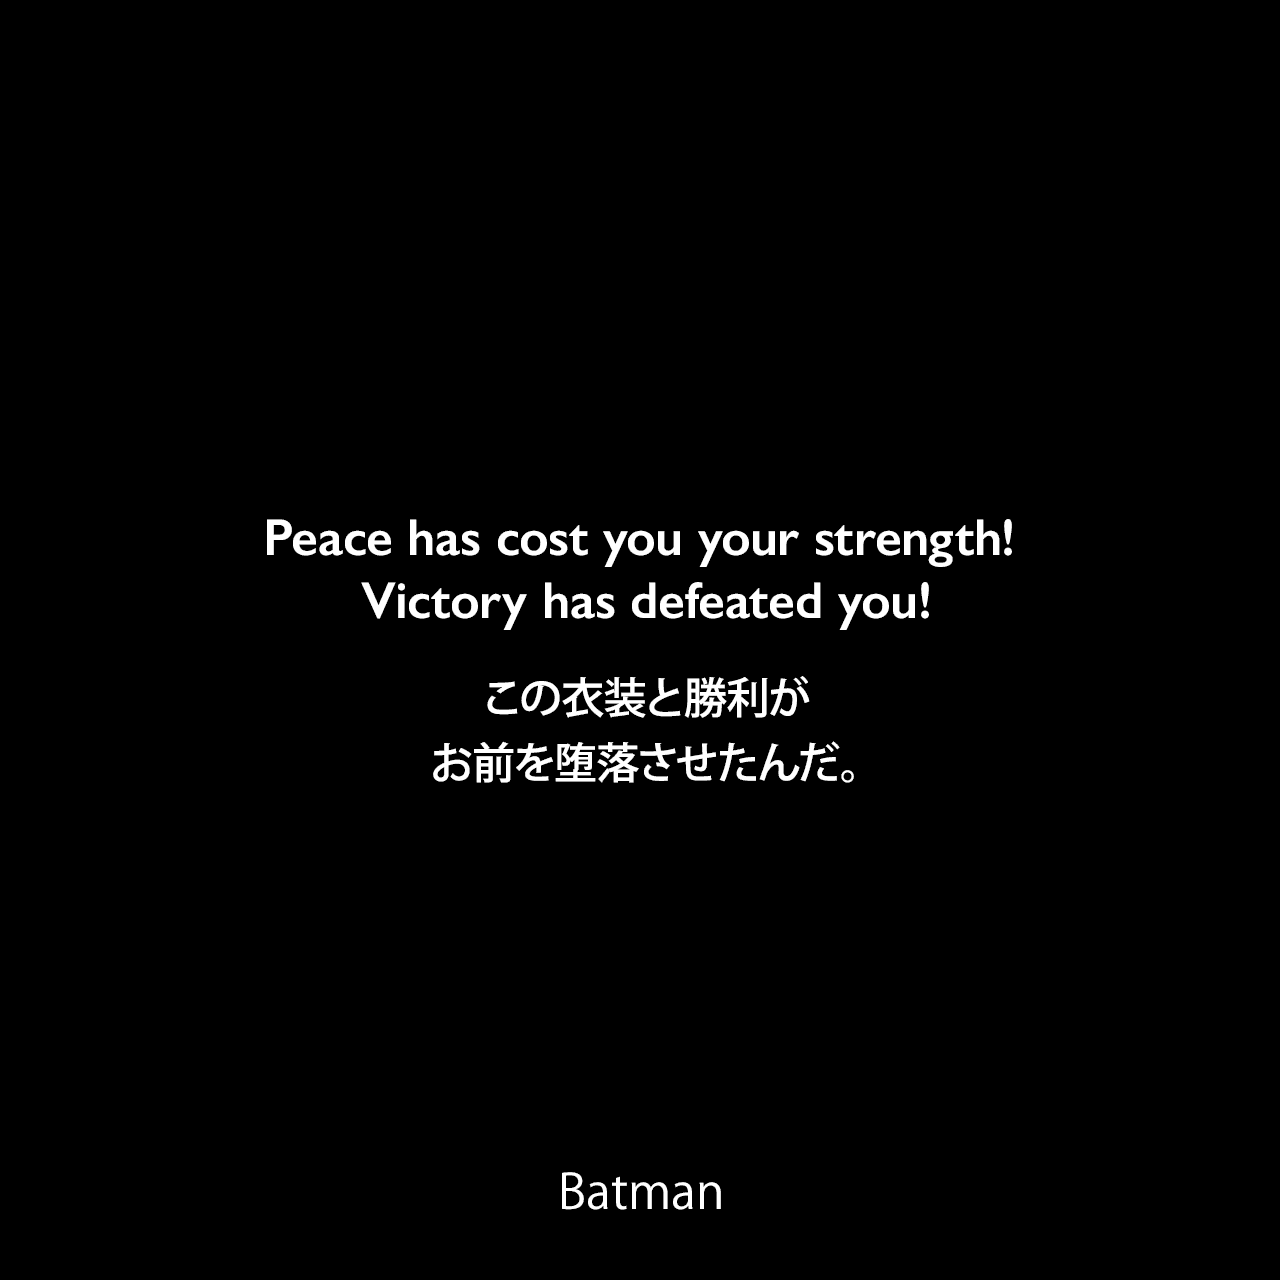 Peace has cost you your strength! Victory has defeated you!この衣装と勝利がお前を堕落させたんだ。- Bane 